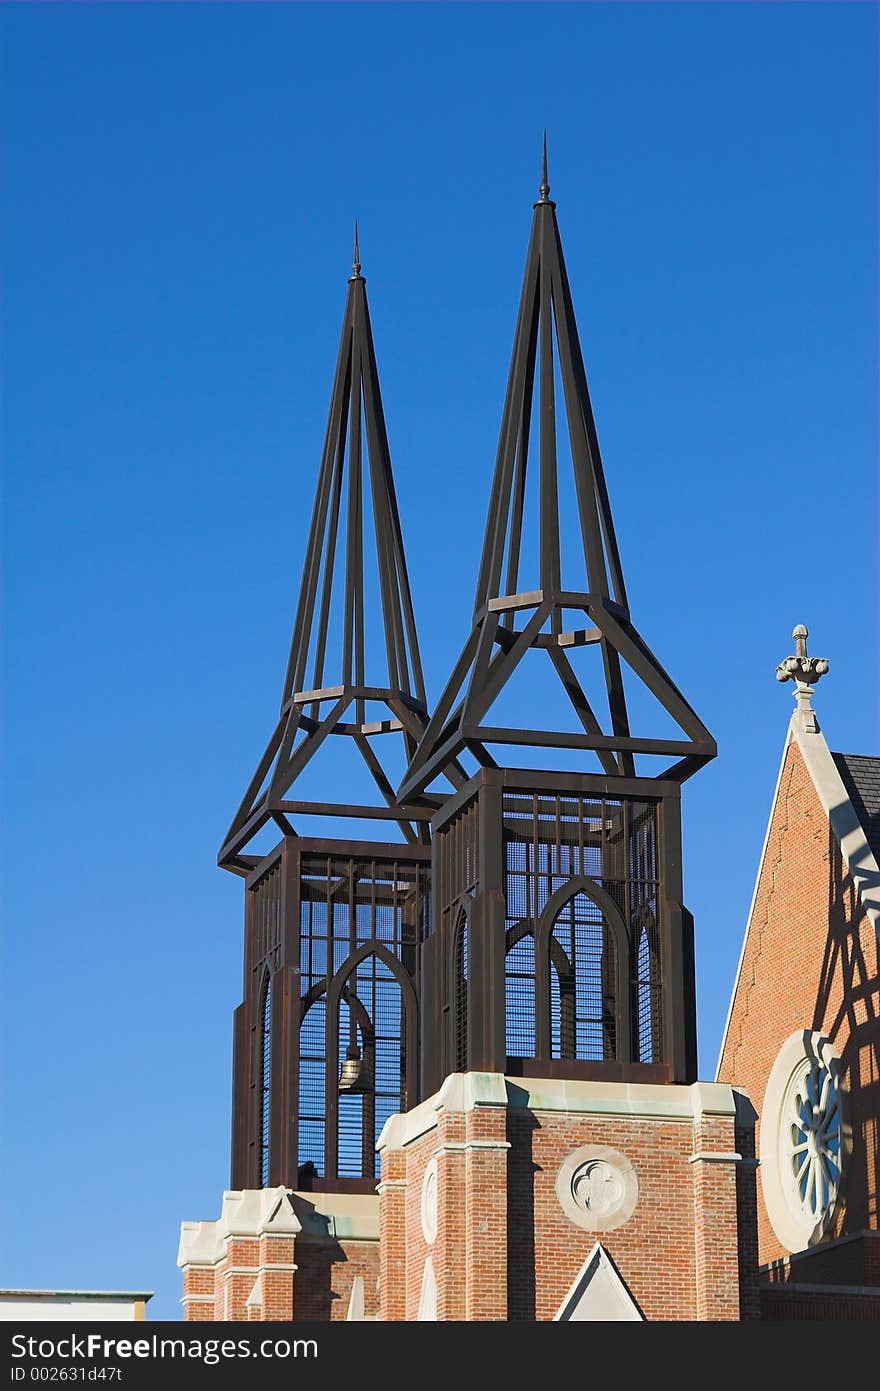 Twin steeples on local church in city